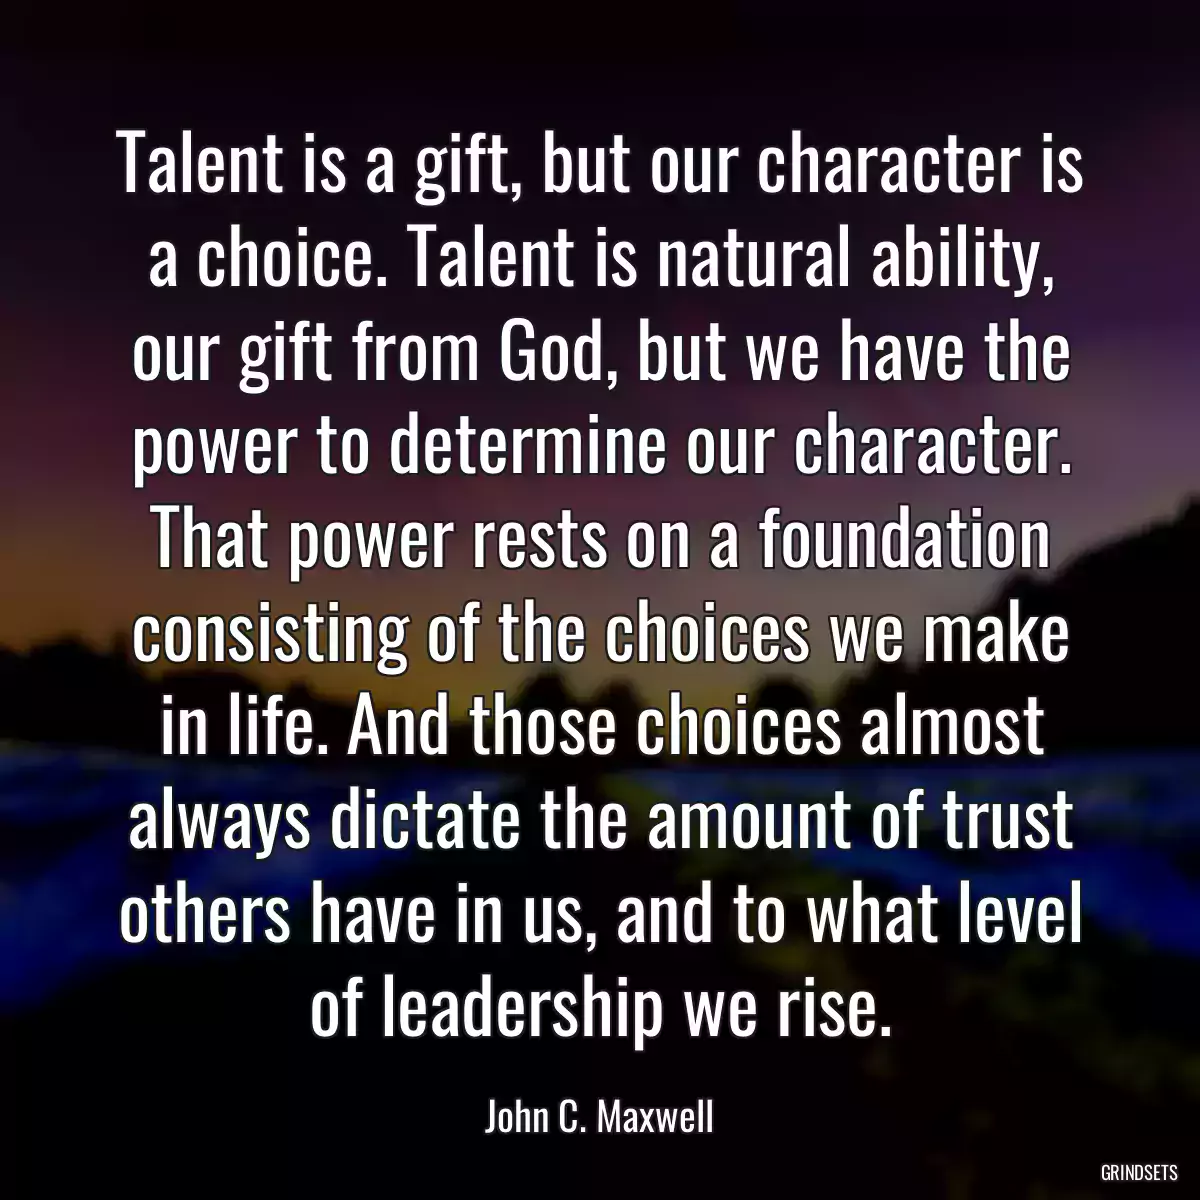 Talent is a gift, but our character is a choice. Talent is natural ability, our gift from God, but we have the power to determine our character. That power rests on a foundation consisting of the choices we make in life. And those choices almost always dictate the amount of trust others have in us, and to what level of leadership we rise.